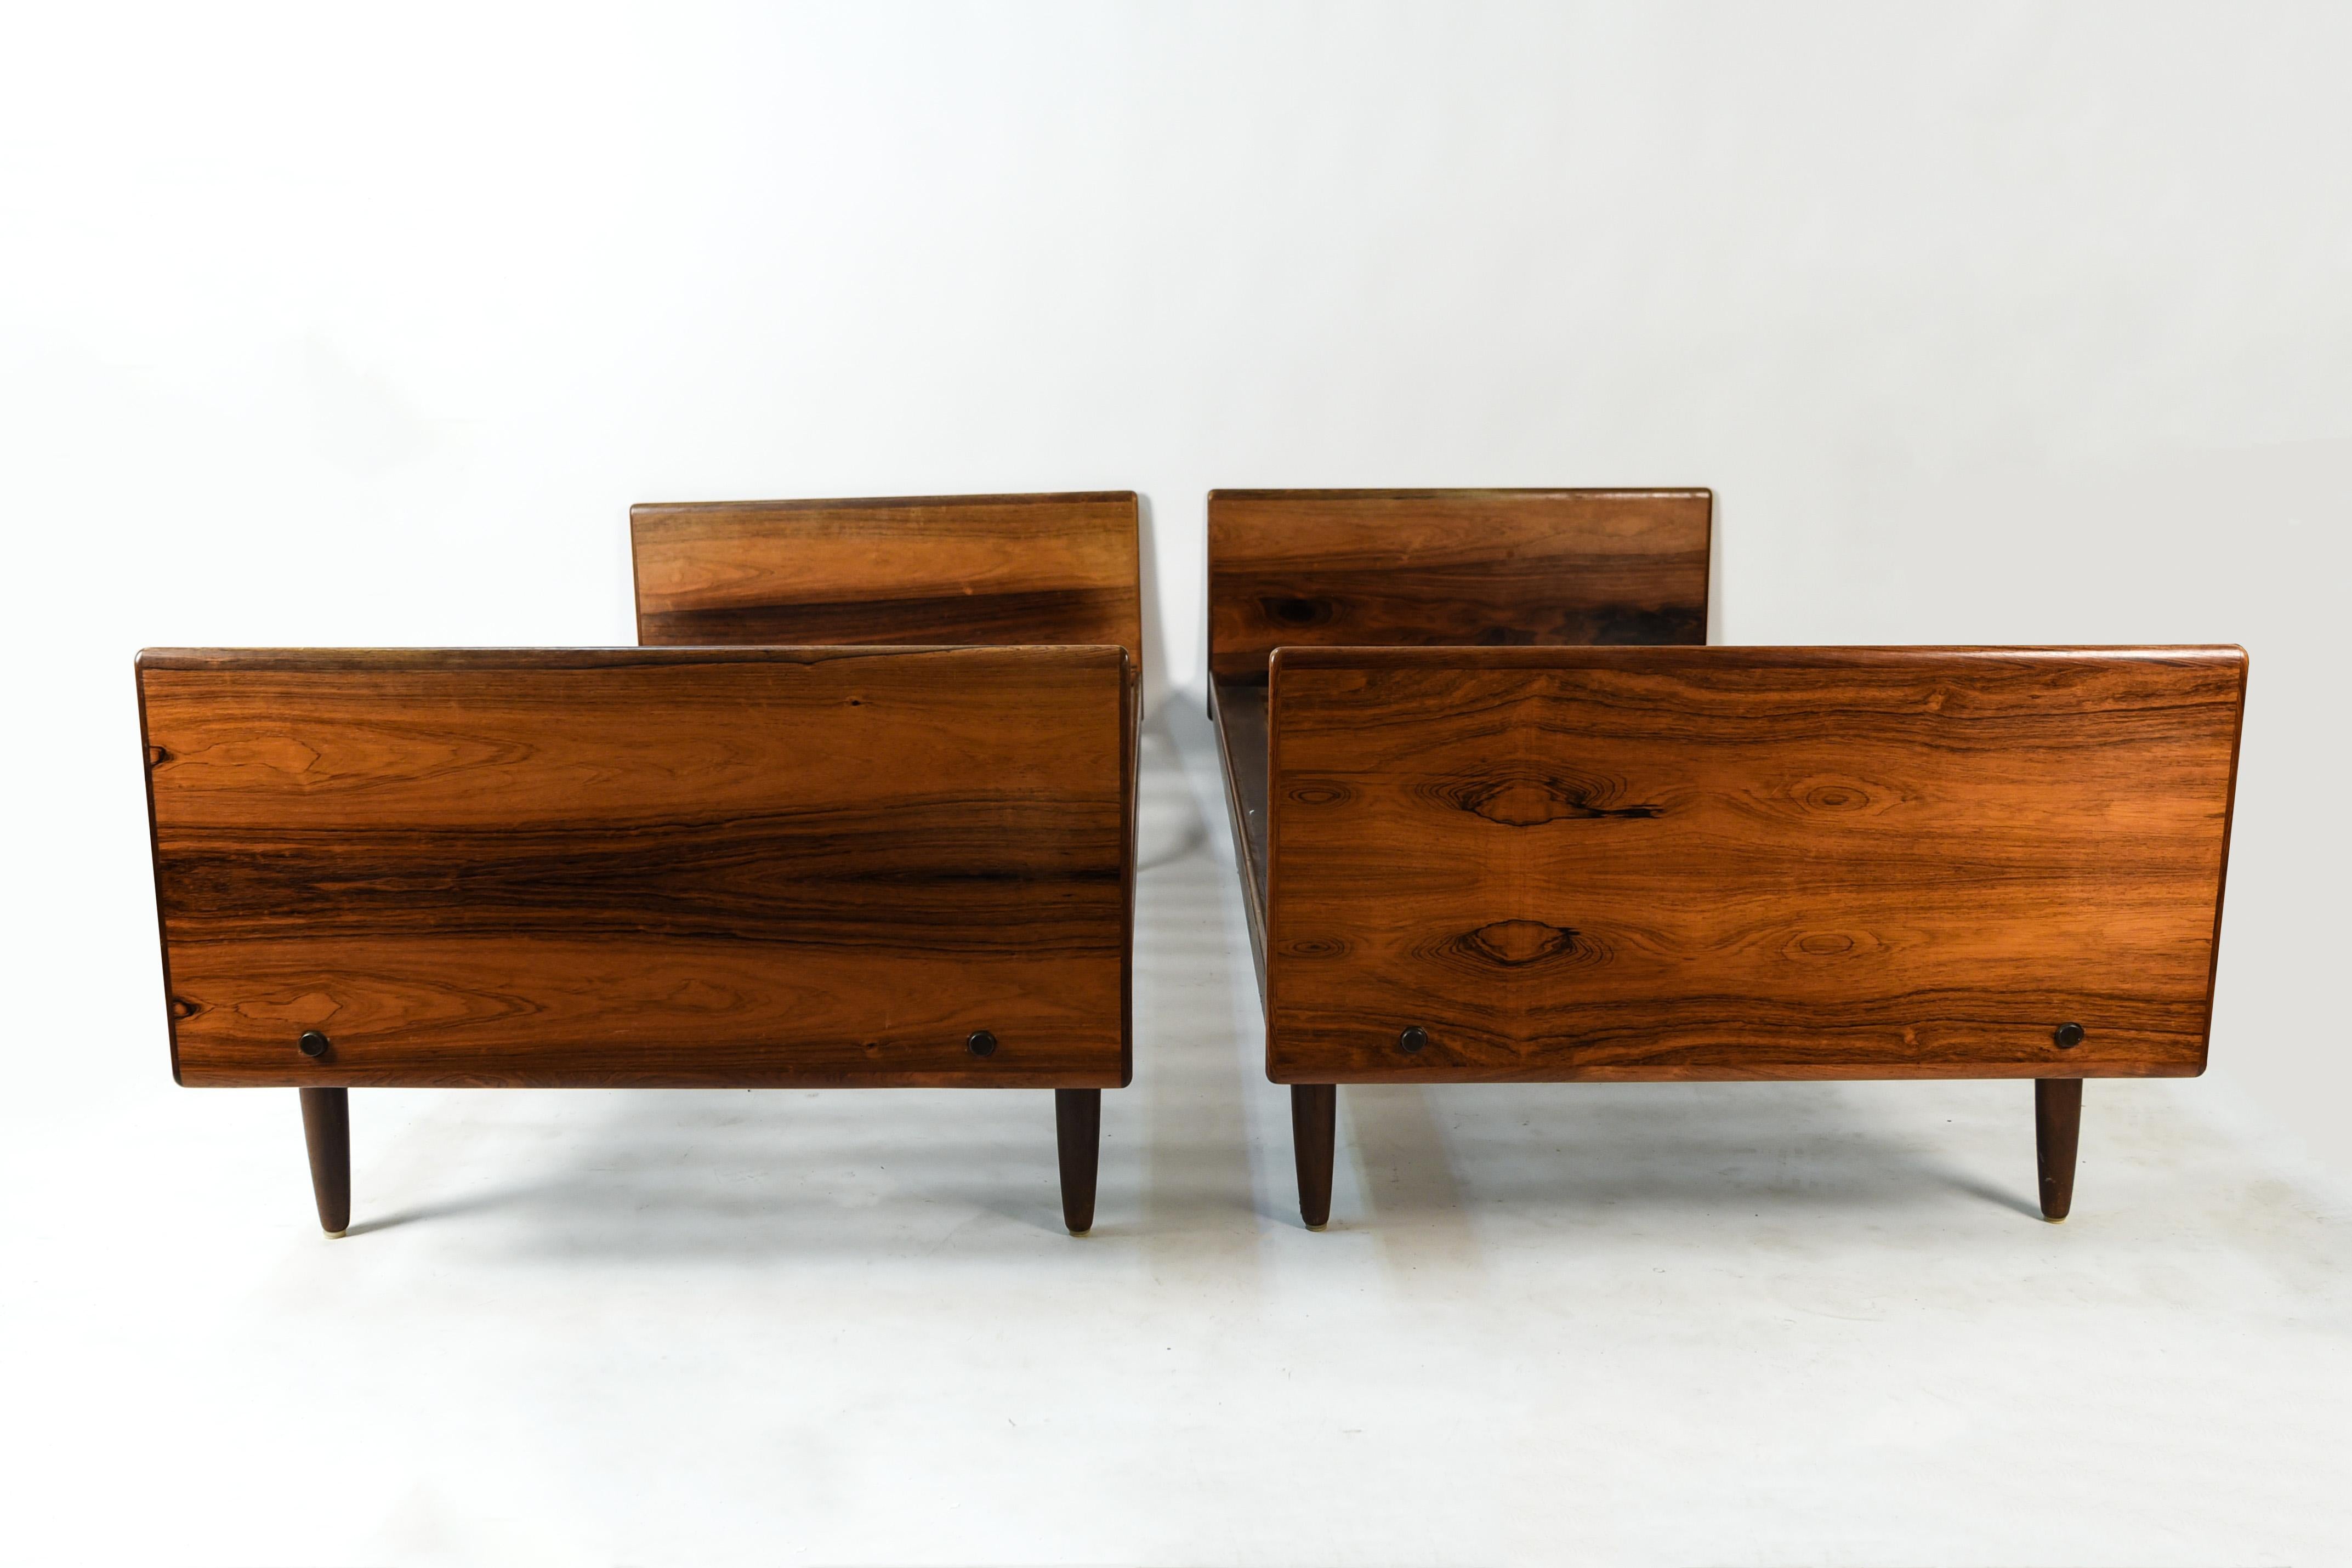 This charming pair of Danish midcentury rosewood beds is a wonderful way to introduce modern design to a bedroom. The pair allows for a cohesive, consistent look of high quality as shown in the rosewood.